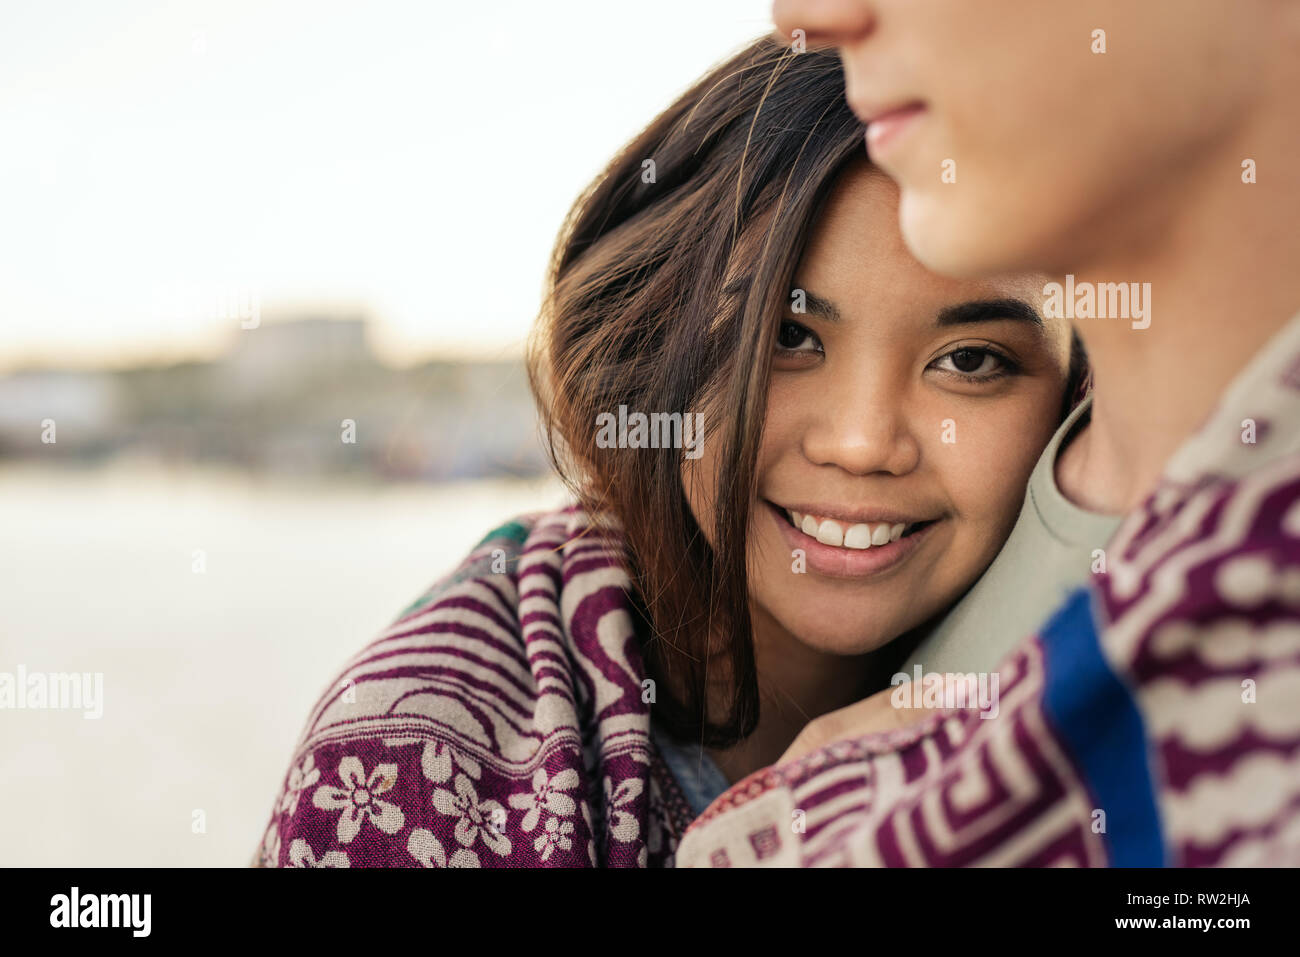 Smiling young woman wrapped in a blanket with her boyfriend Stock Photo